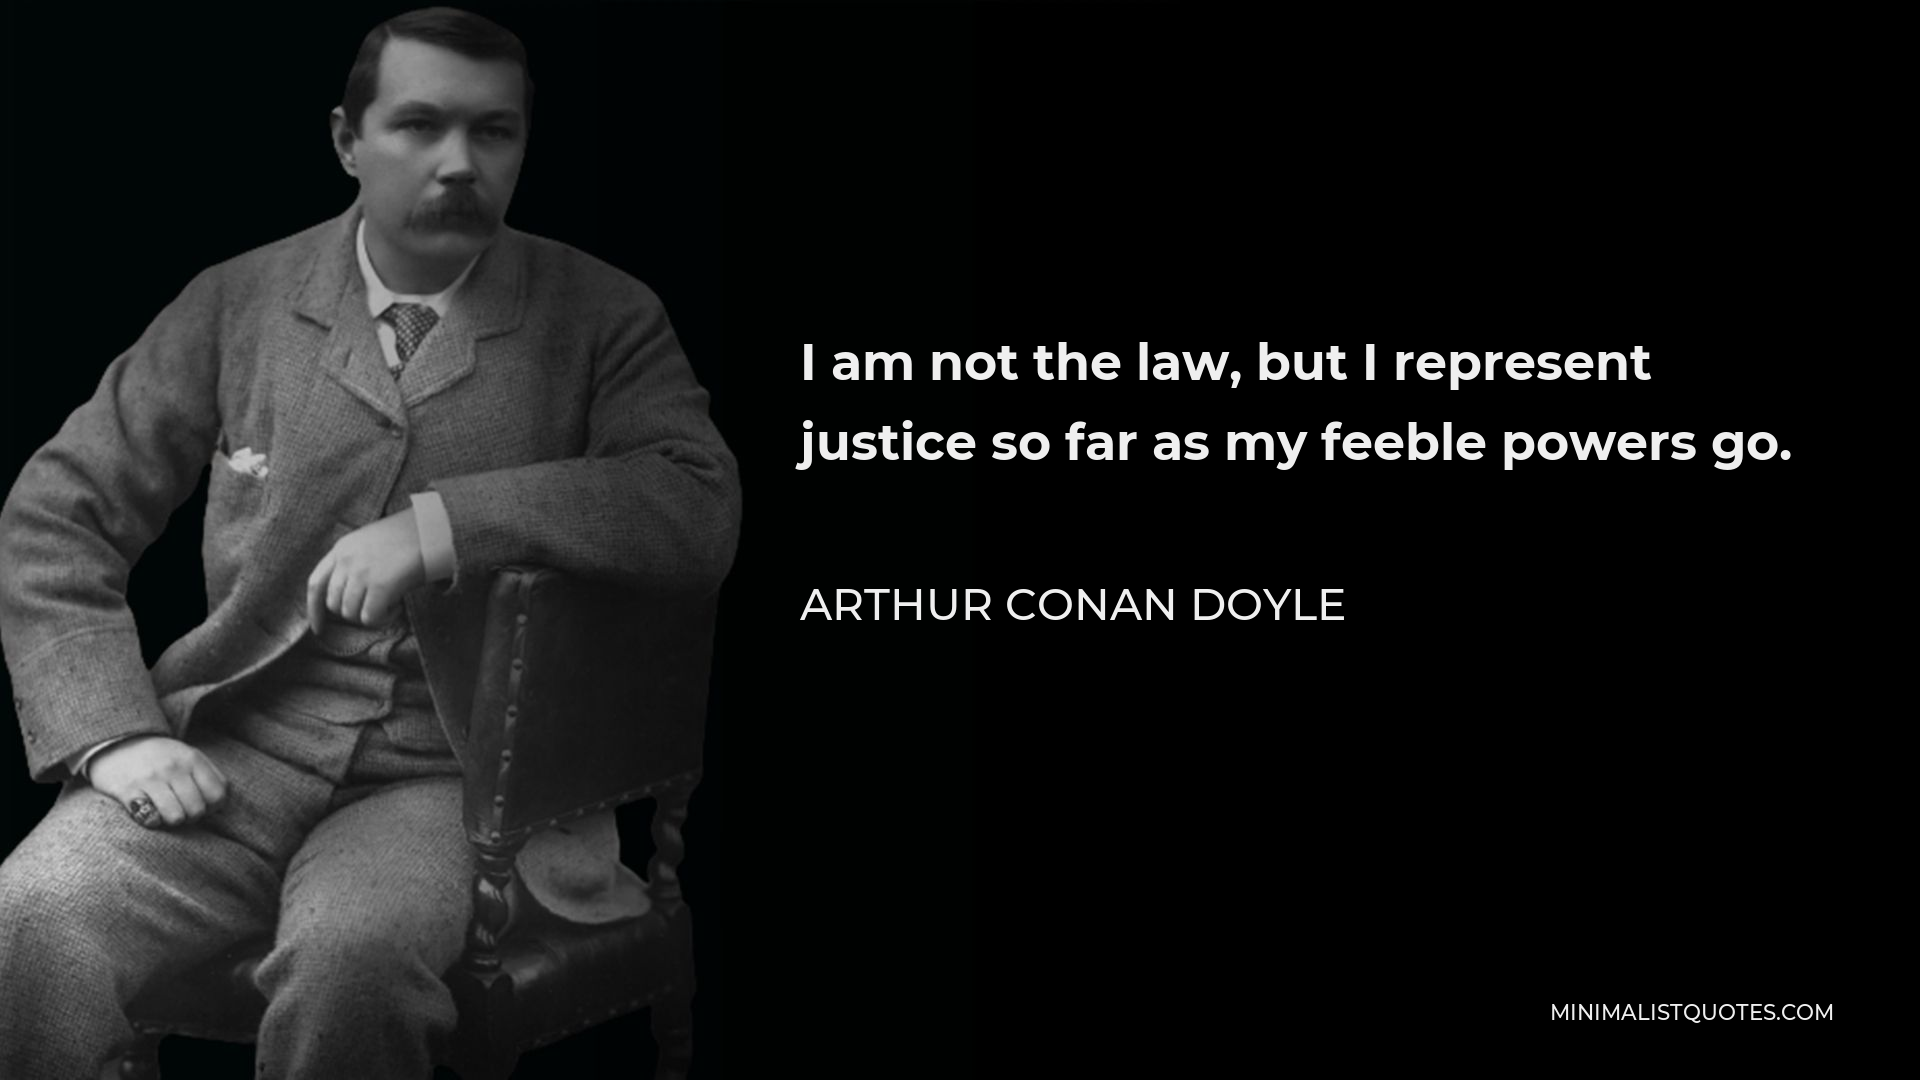 Arthur Conan Doyle Quote - I am not the law, but I represent justice so far as my feeble powers go.